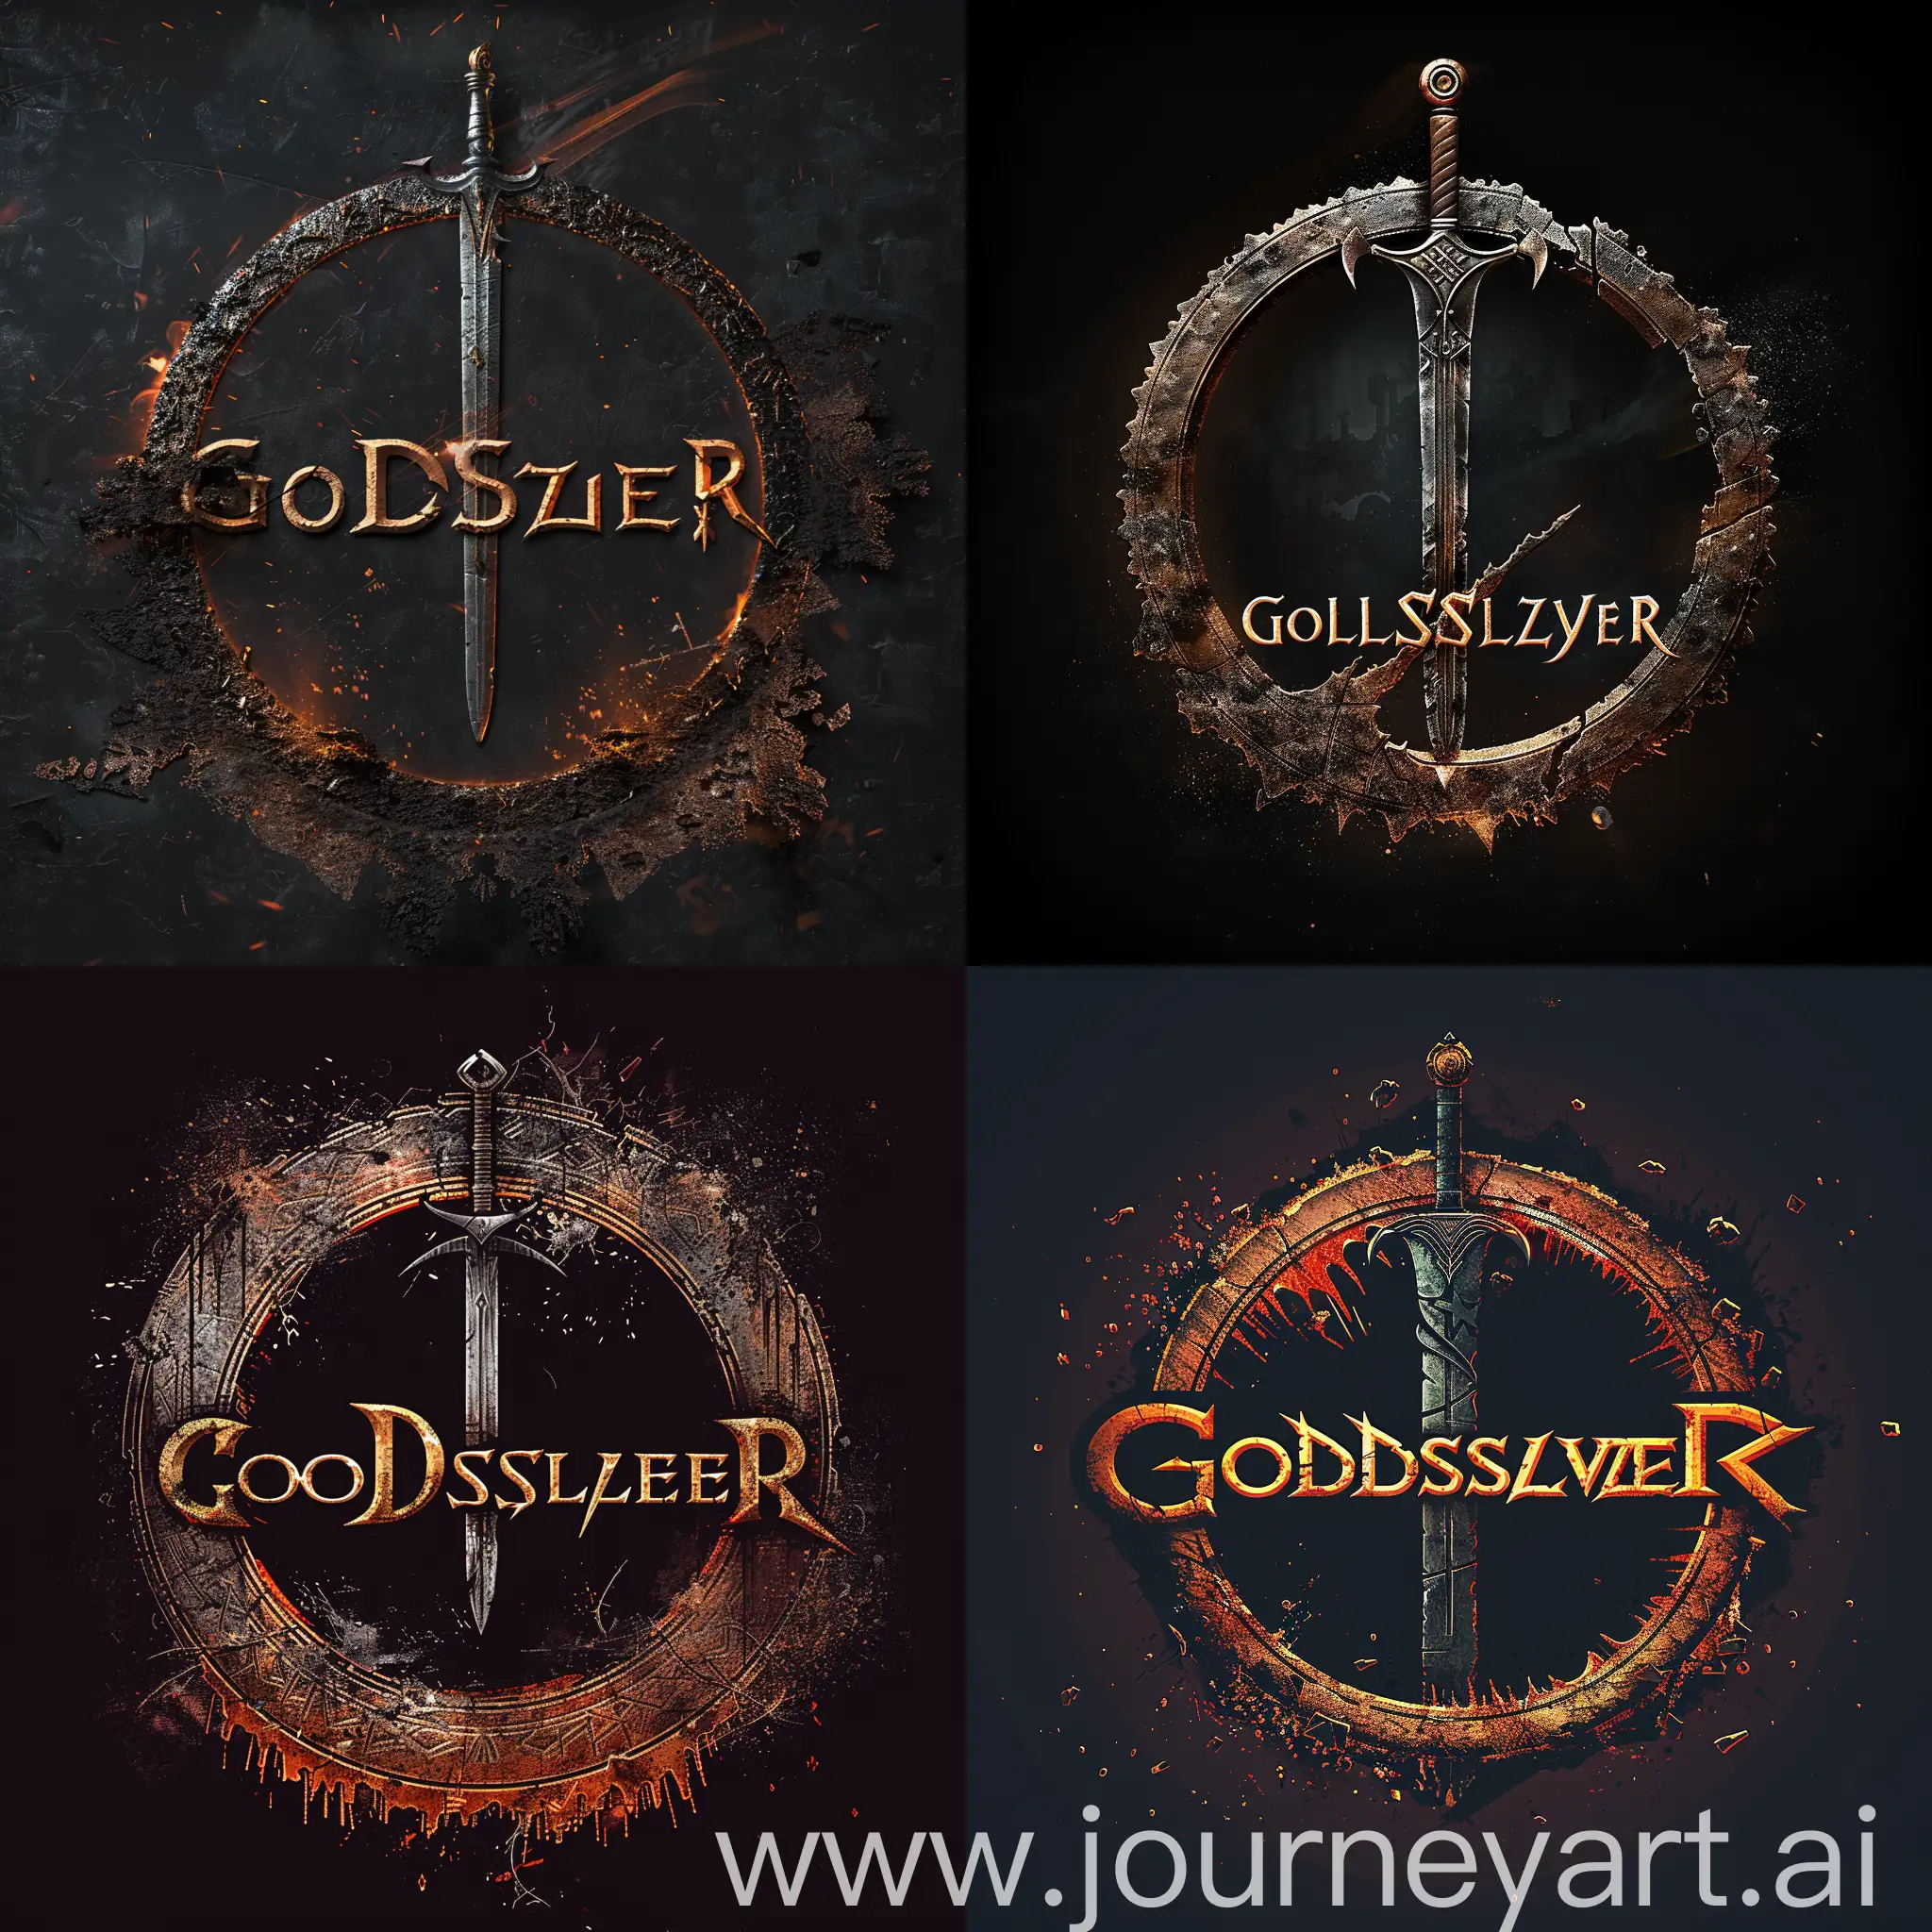 Come up with a logo for an FPS videogame about killing Nordic gods, called "GodslayeR". be inspired by the FALLOUT videogame franchise logo or the Elder Scrolls videogame Logo. Have a sword go through the text, and the bottom of the circle should be deteriorating